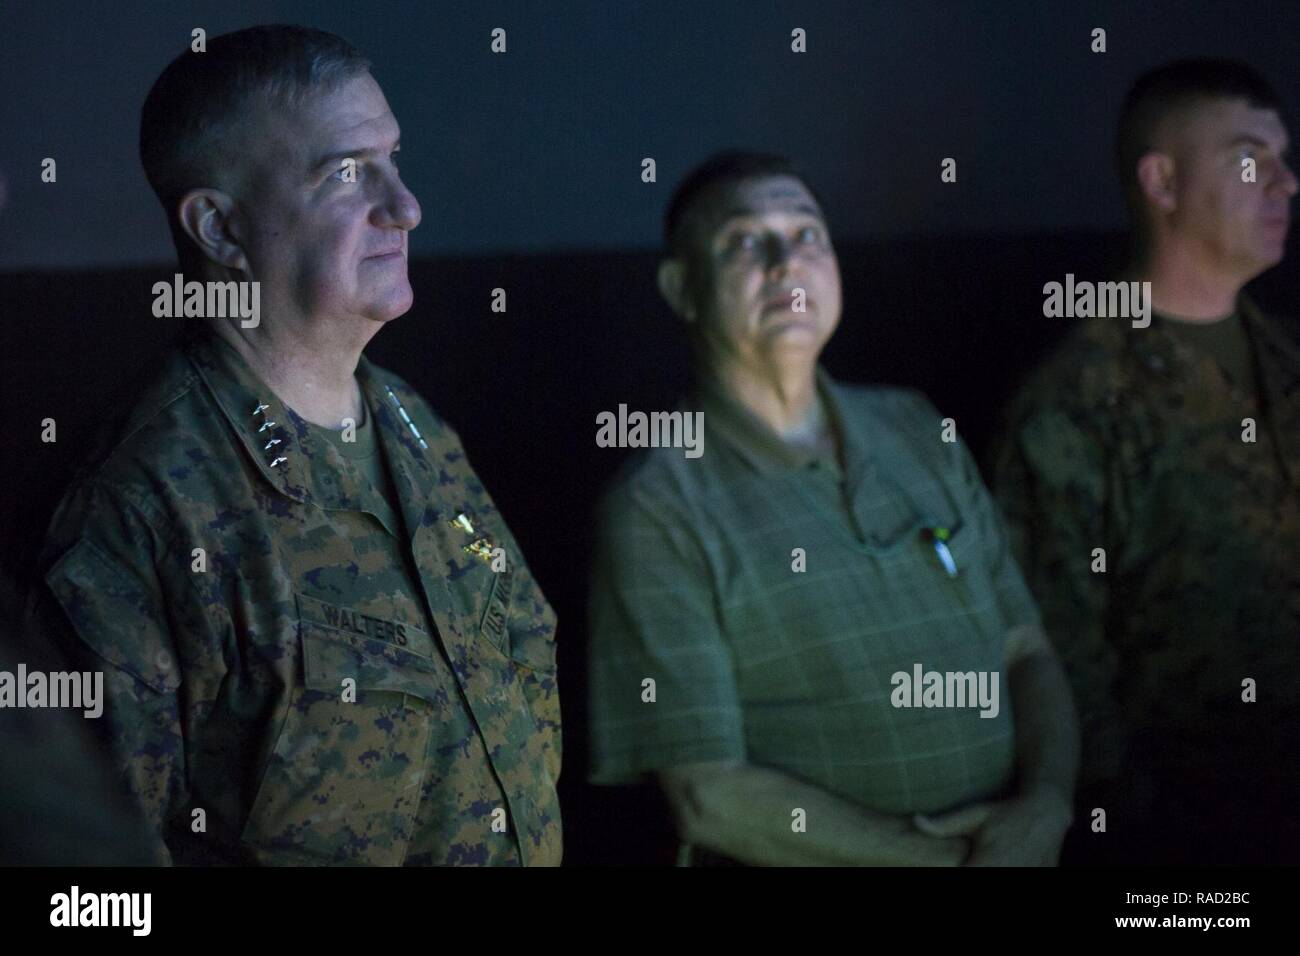 U.S. Marine Corps Gen. Glenn Walters, Assistant Commandant of the Marine Corps, observes a simulator training system during a visit to Camp Lejeune, N.C., Jan. 26, 2017. The purpose of the visit was to increase awareness and capabilities of ground simulation and simulator training systems in support of operational forces combat readiness. Stock Photo